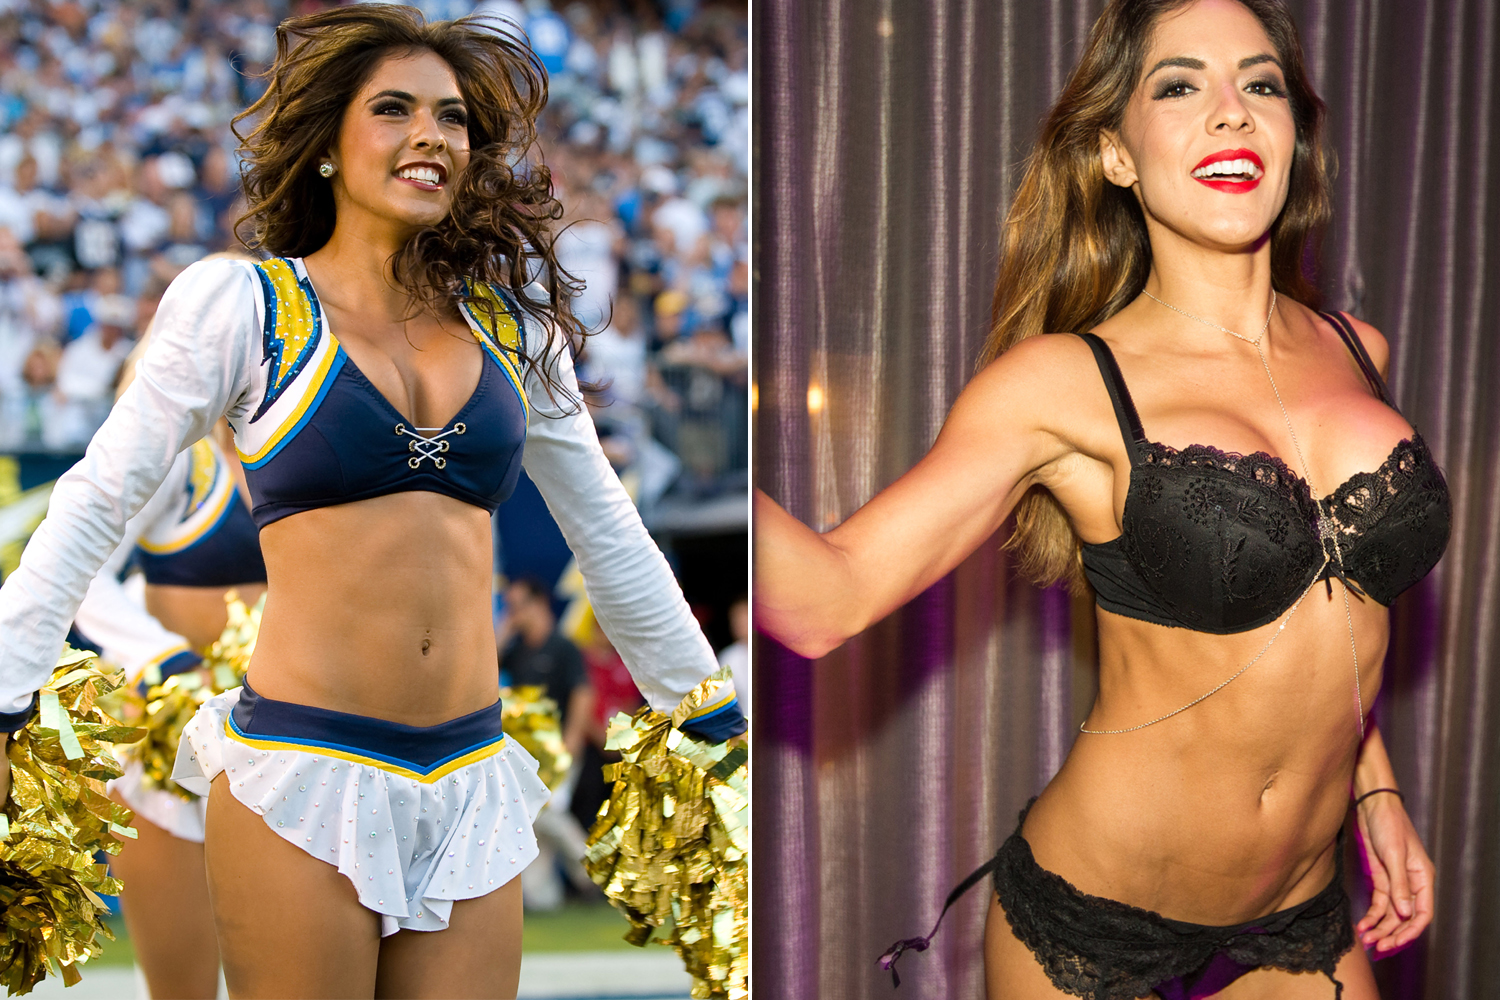 buster baxter recommends hot naked nfl cheerleaders pic